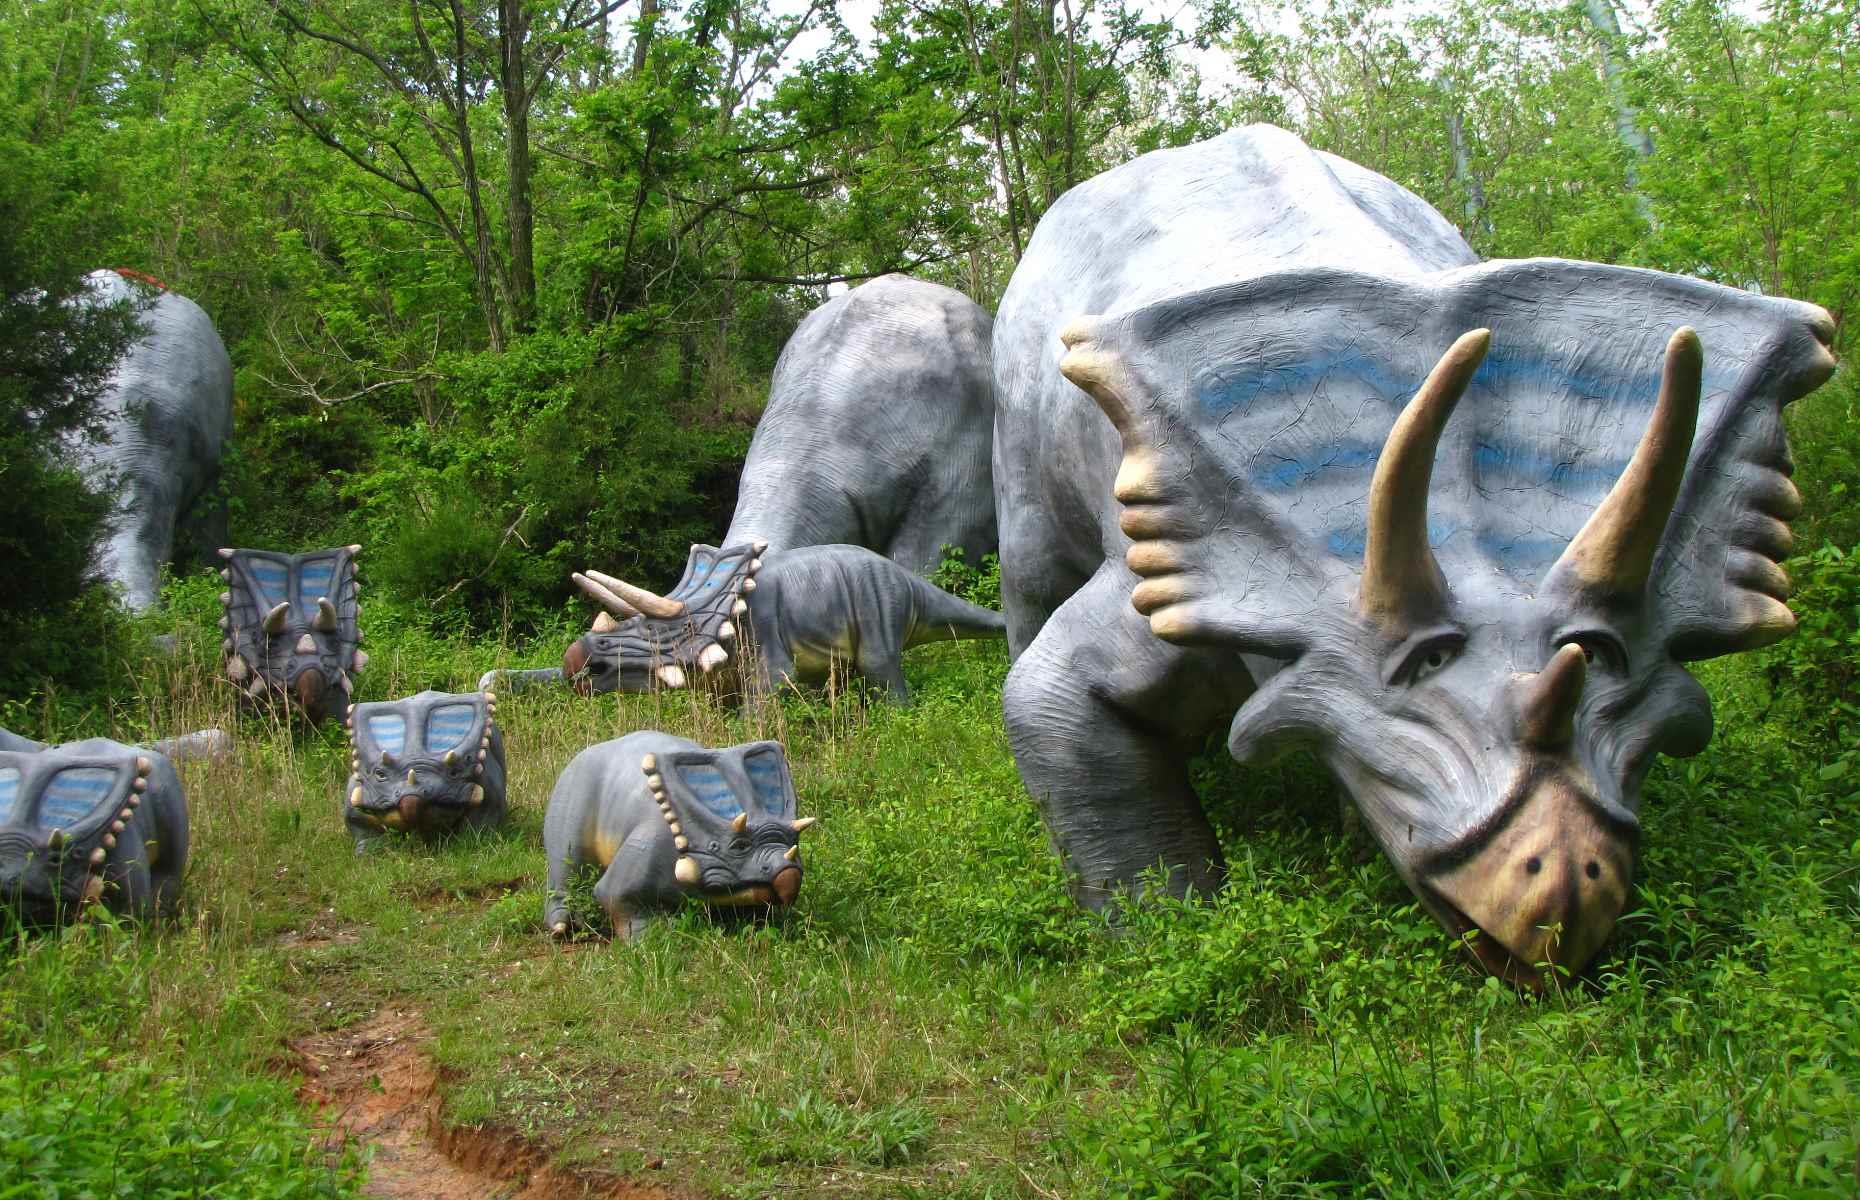 A giant T-Rex beckons road-trippers to pull into Dinosaur World, off the I-65 near Mammoth Cave National Park. Or, perhaps, spurs them on to drive on by in fear.   This Jurassic Park–style roadside attraction is home to around 150 dino sculptures scattered among the grounds and sometimes peeping above the trees. There’s also a small museum displaying dinosaur claws, bones, and eggs.